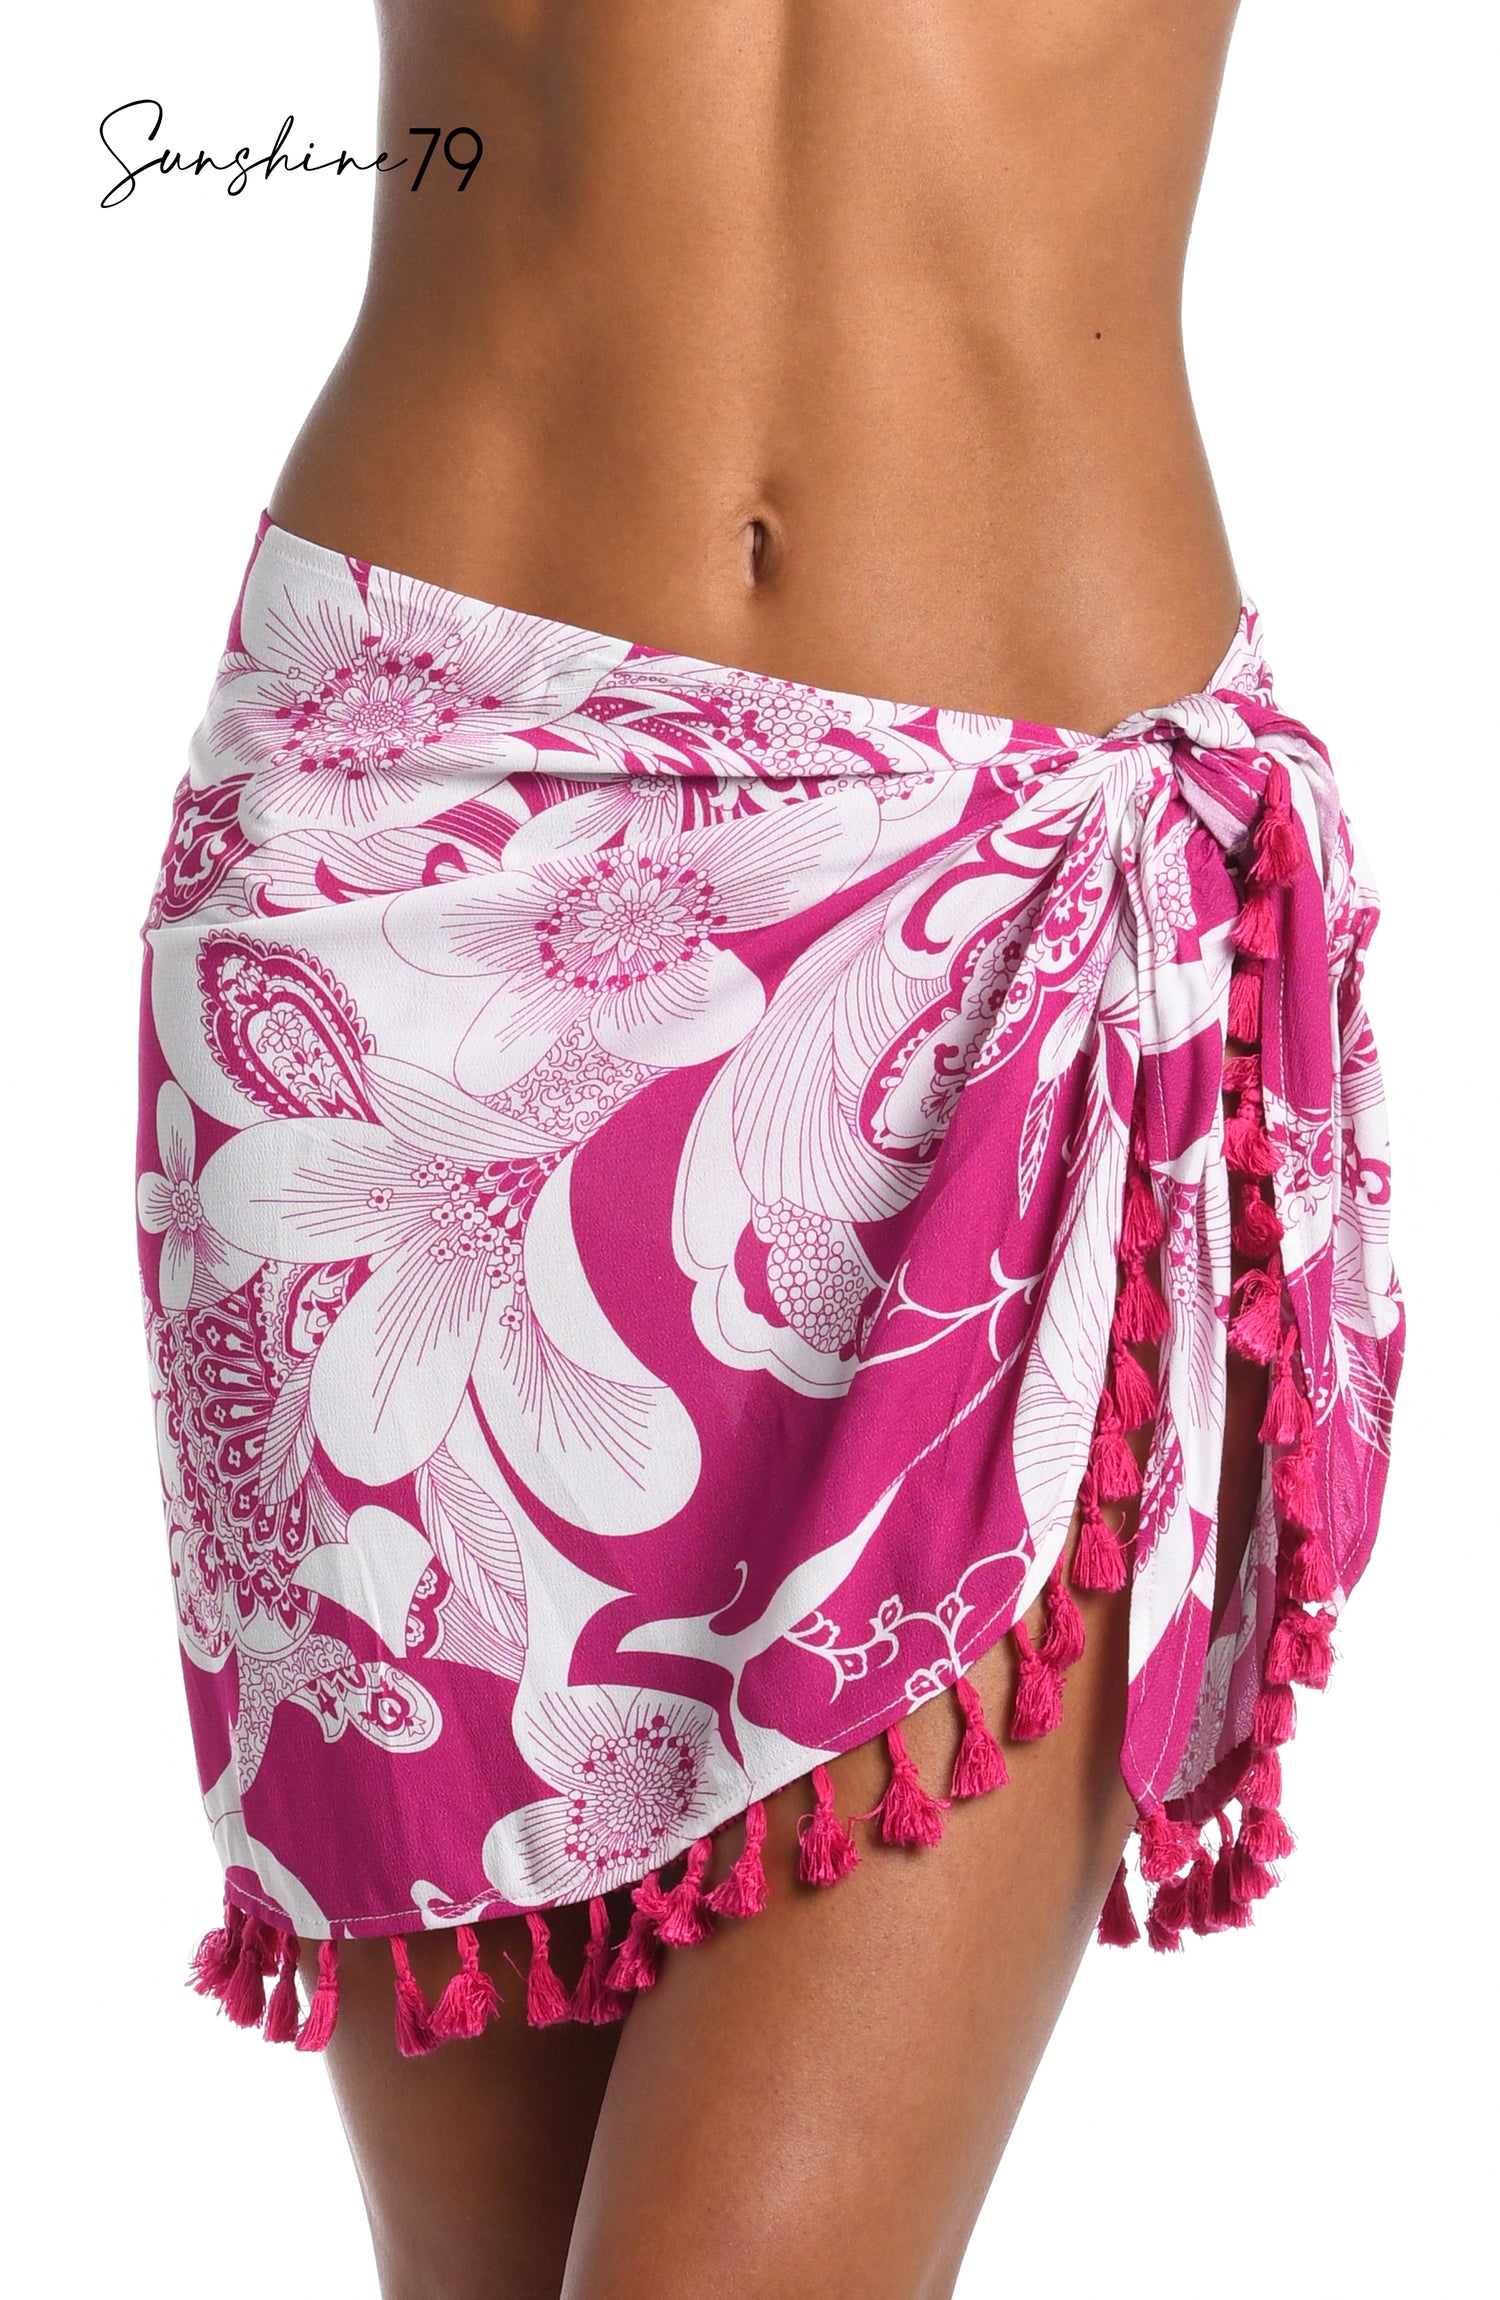 Model is wearing a fuchsia and white multicolored tropical printed short pareo wrap cover up from our Sunshine 79 brand.